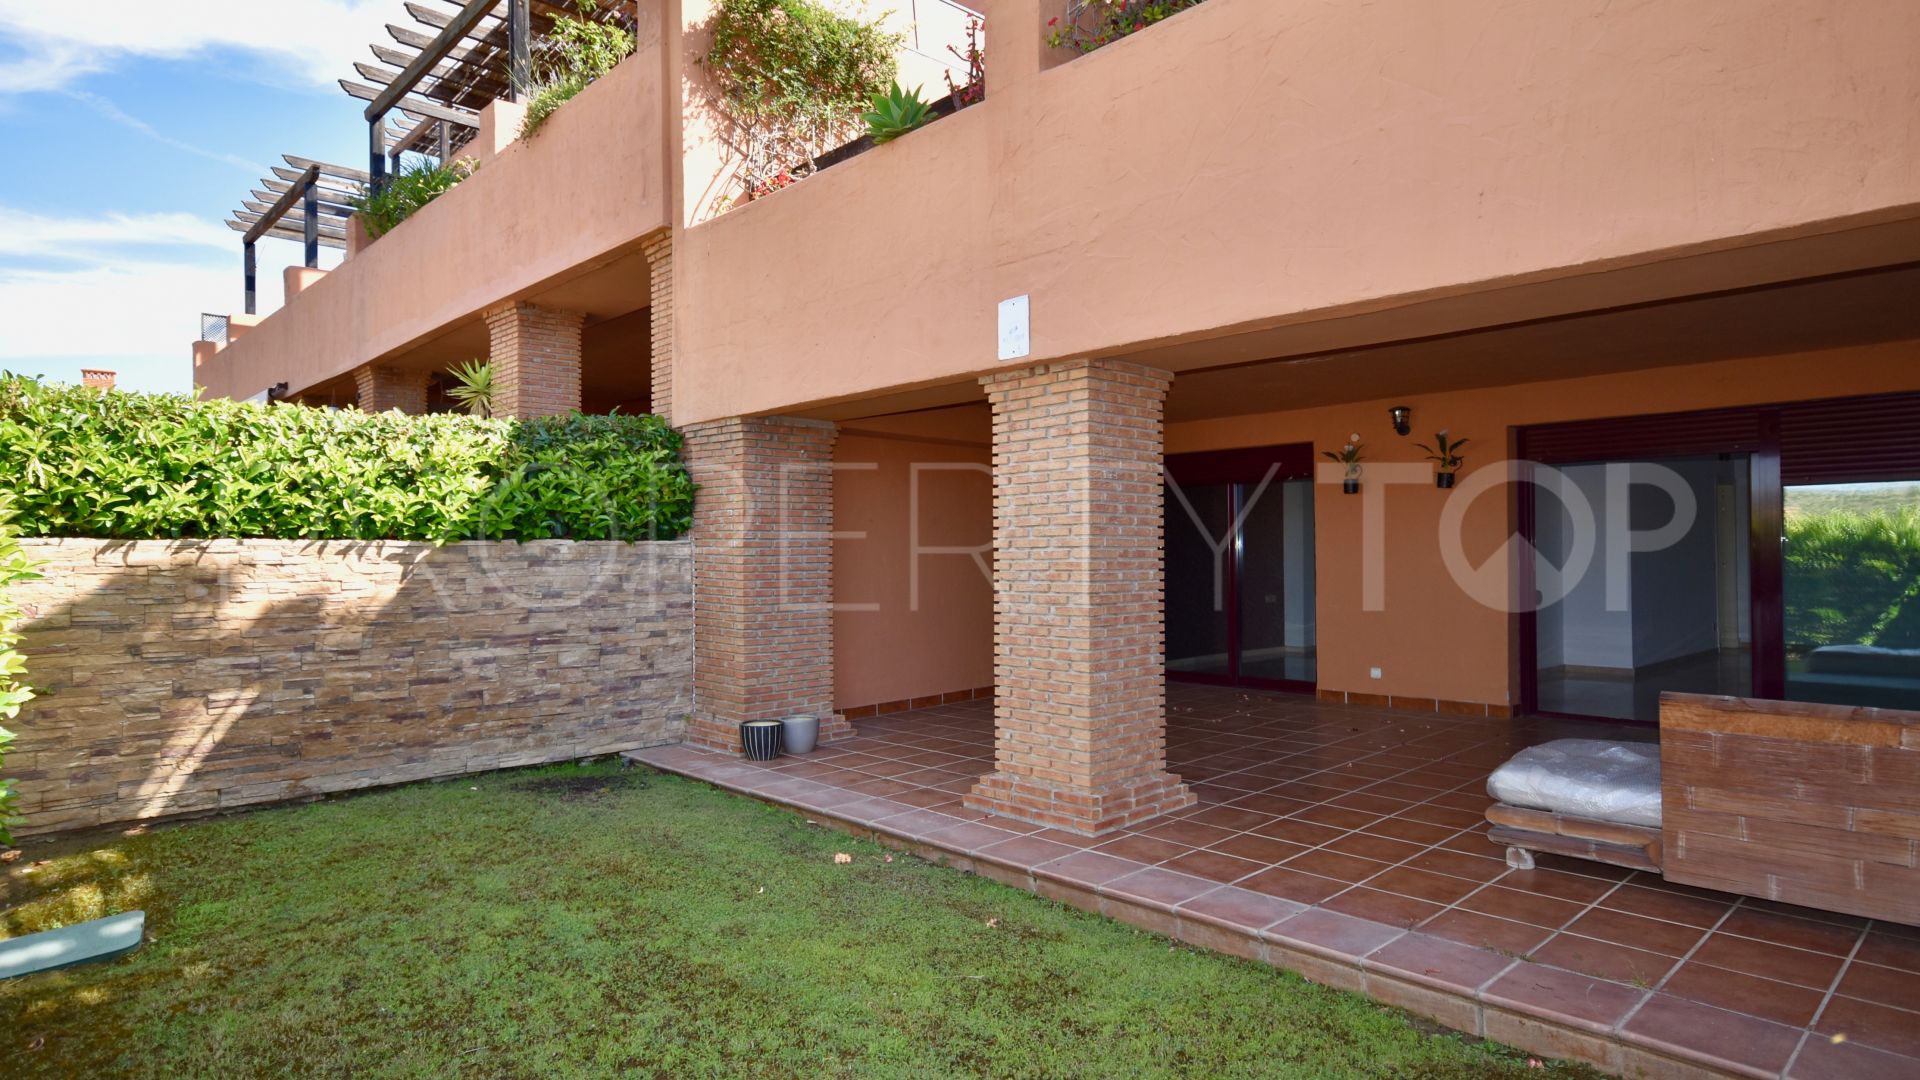 Ground floor apartment for sale in Casares Golf with 2 bedrooms